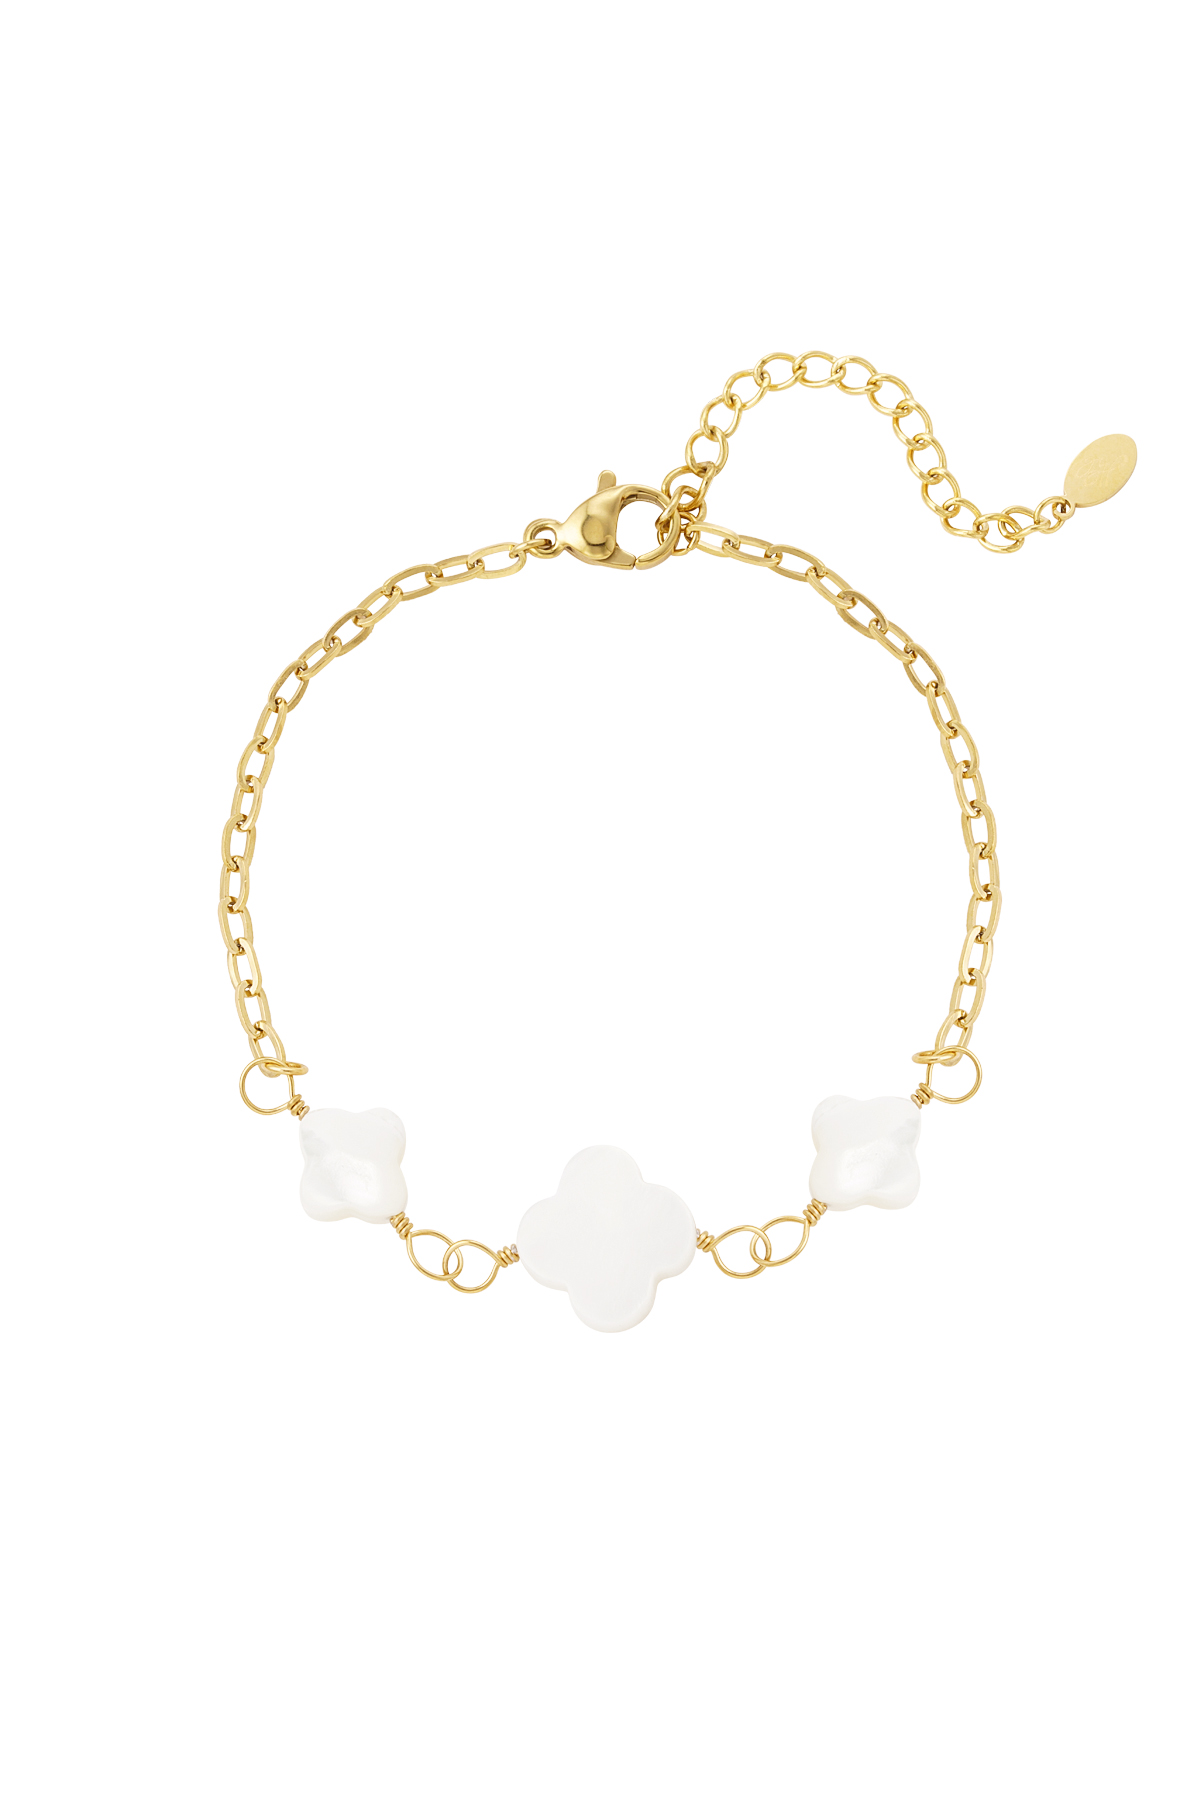 Bracelet with clovers - gold